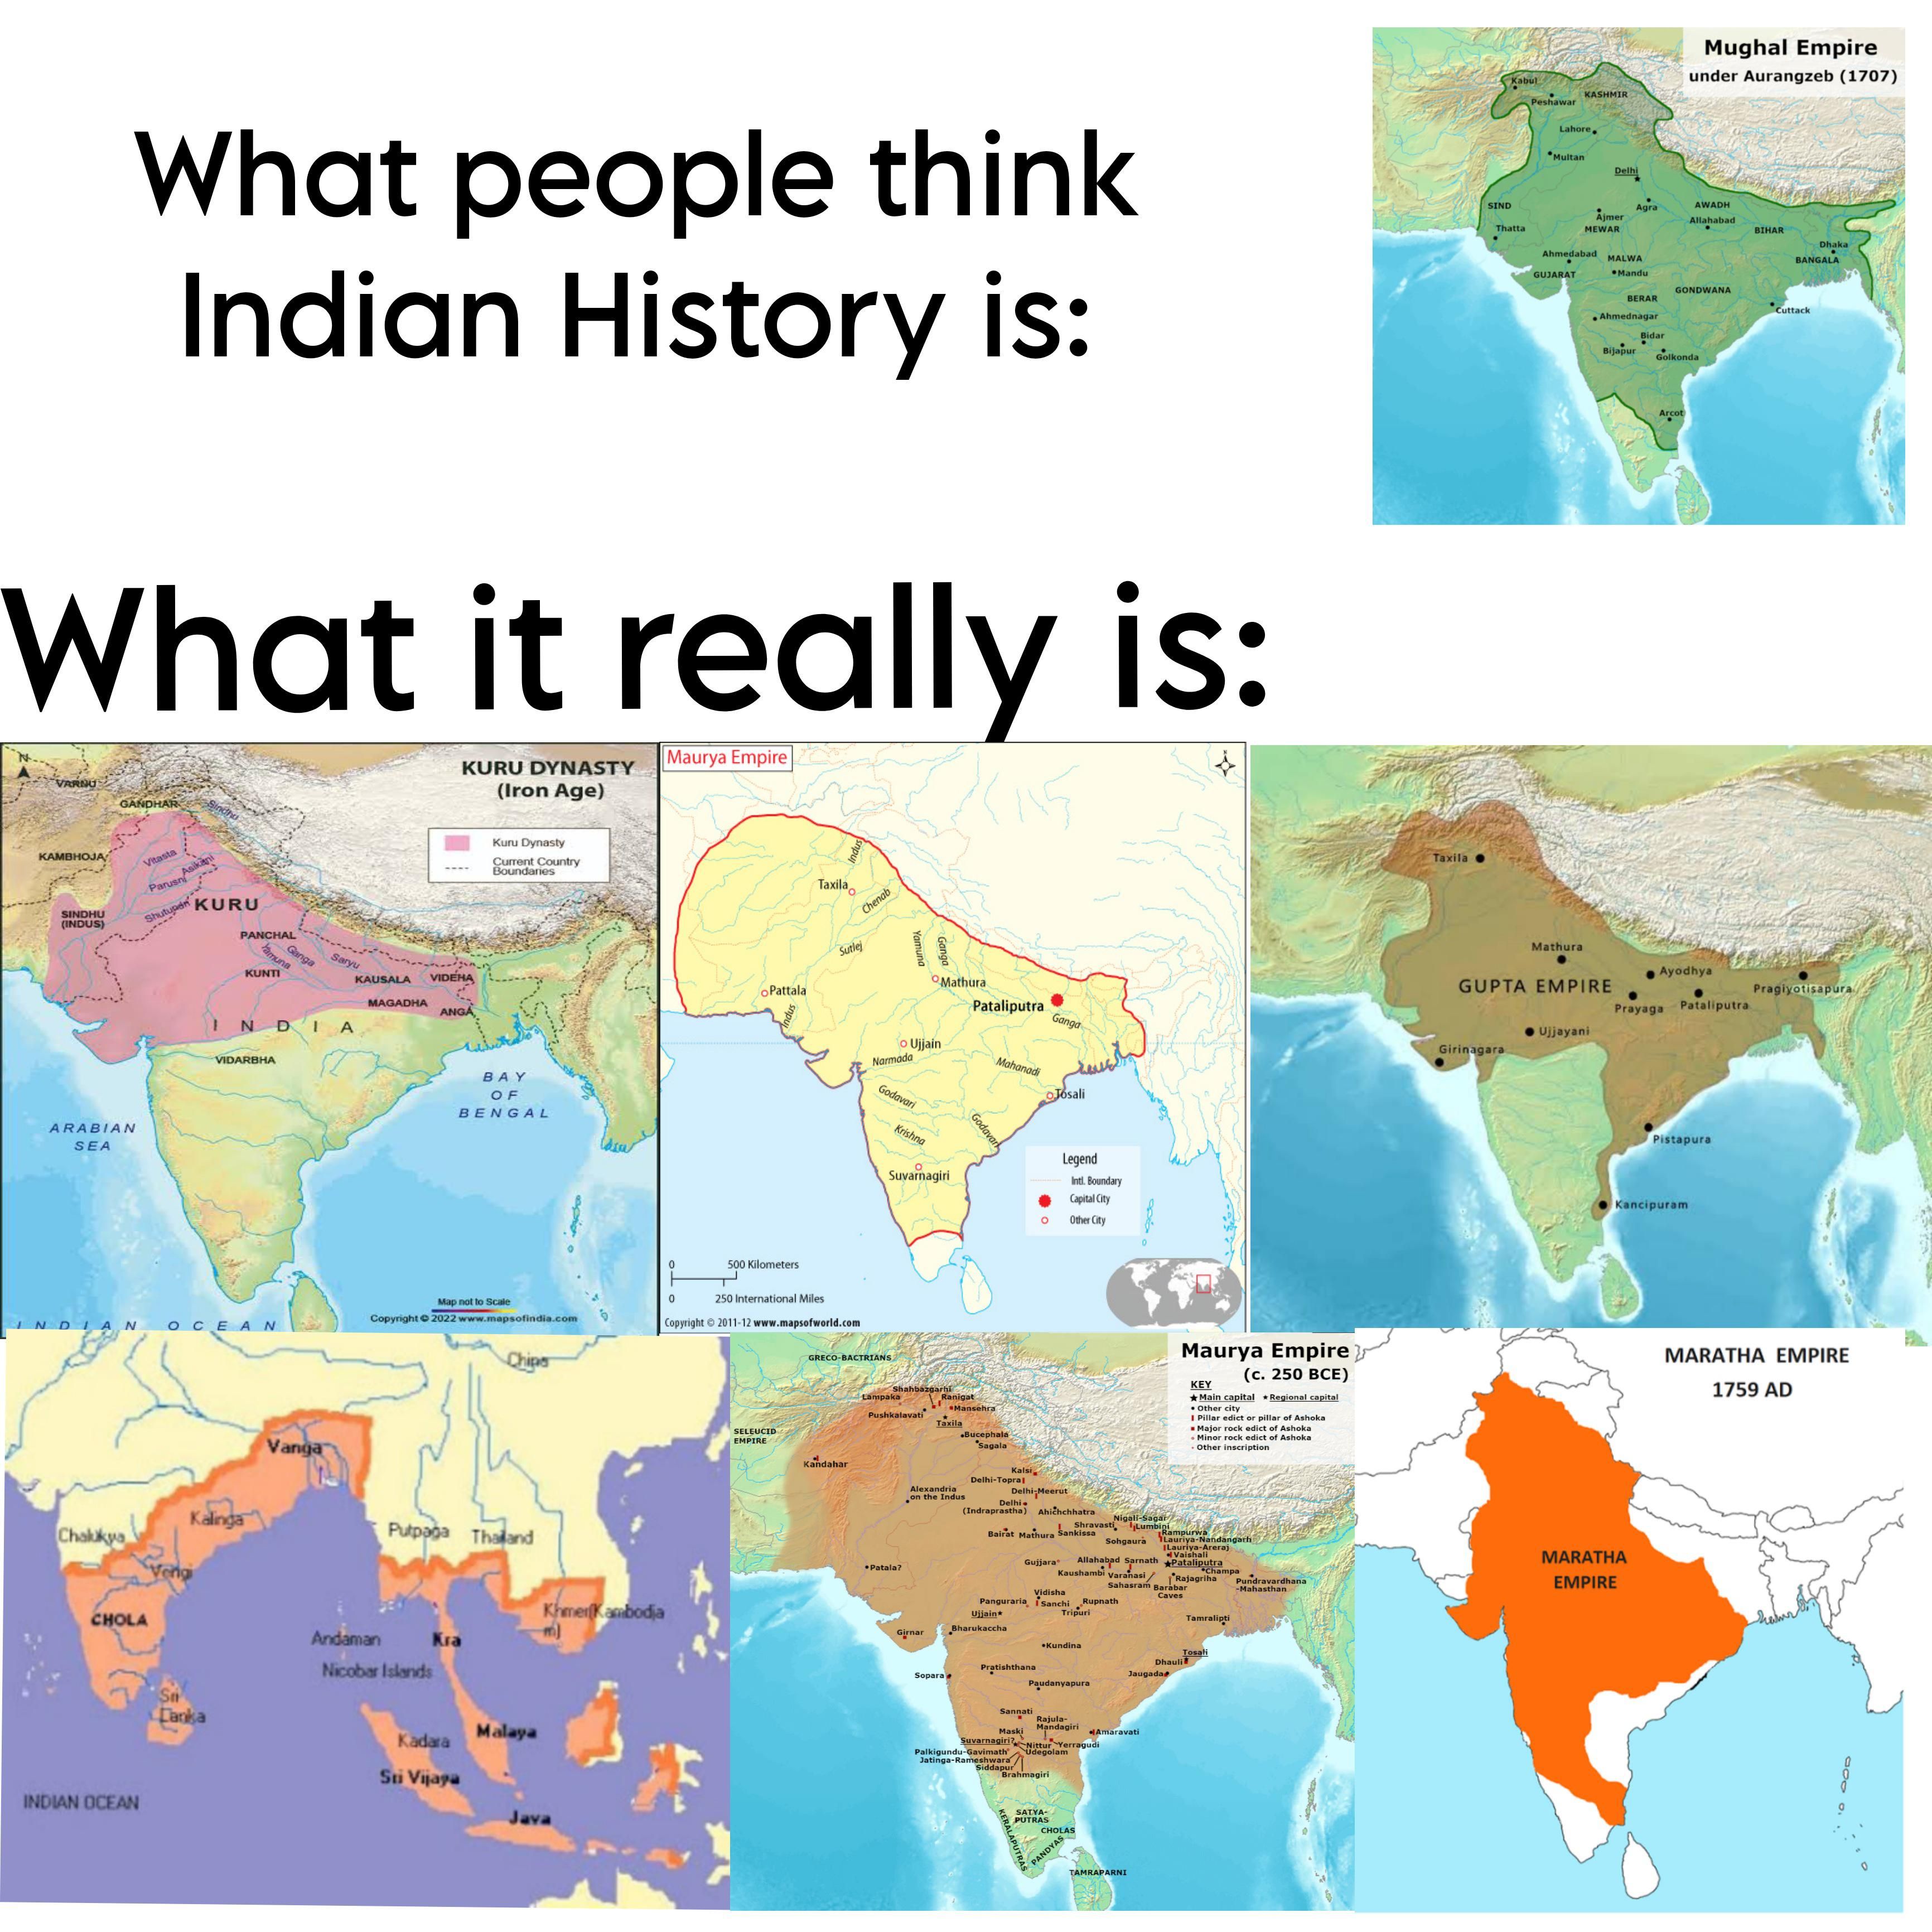 indian history